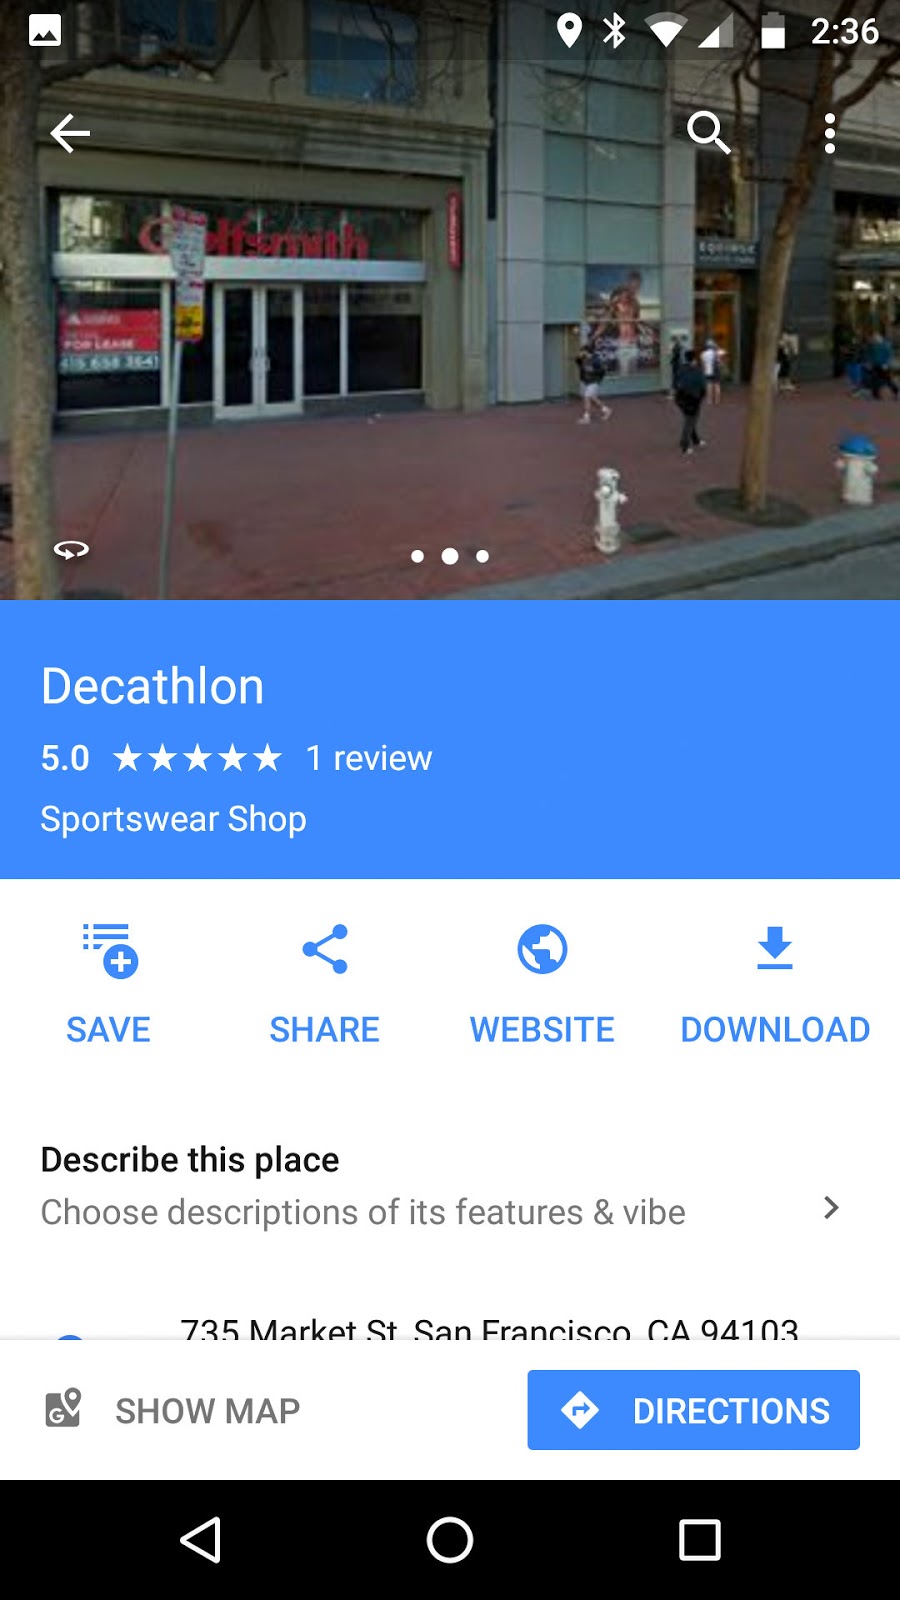 mike downes - we make videos to help people learn: Decathlon USA new store  in San Francisco on Maps Pushpin for Streetview front of store versus back